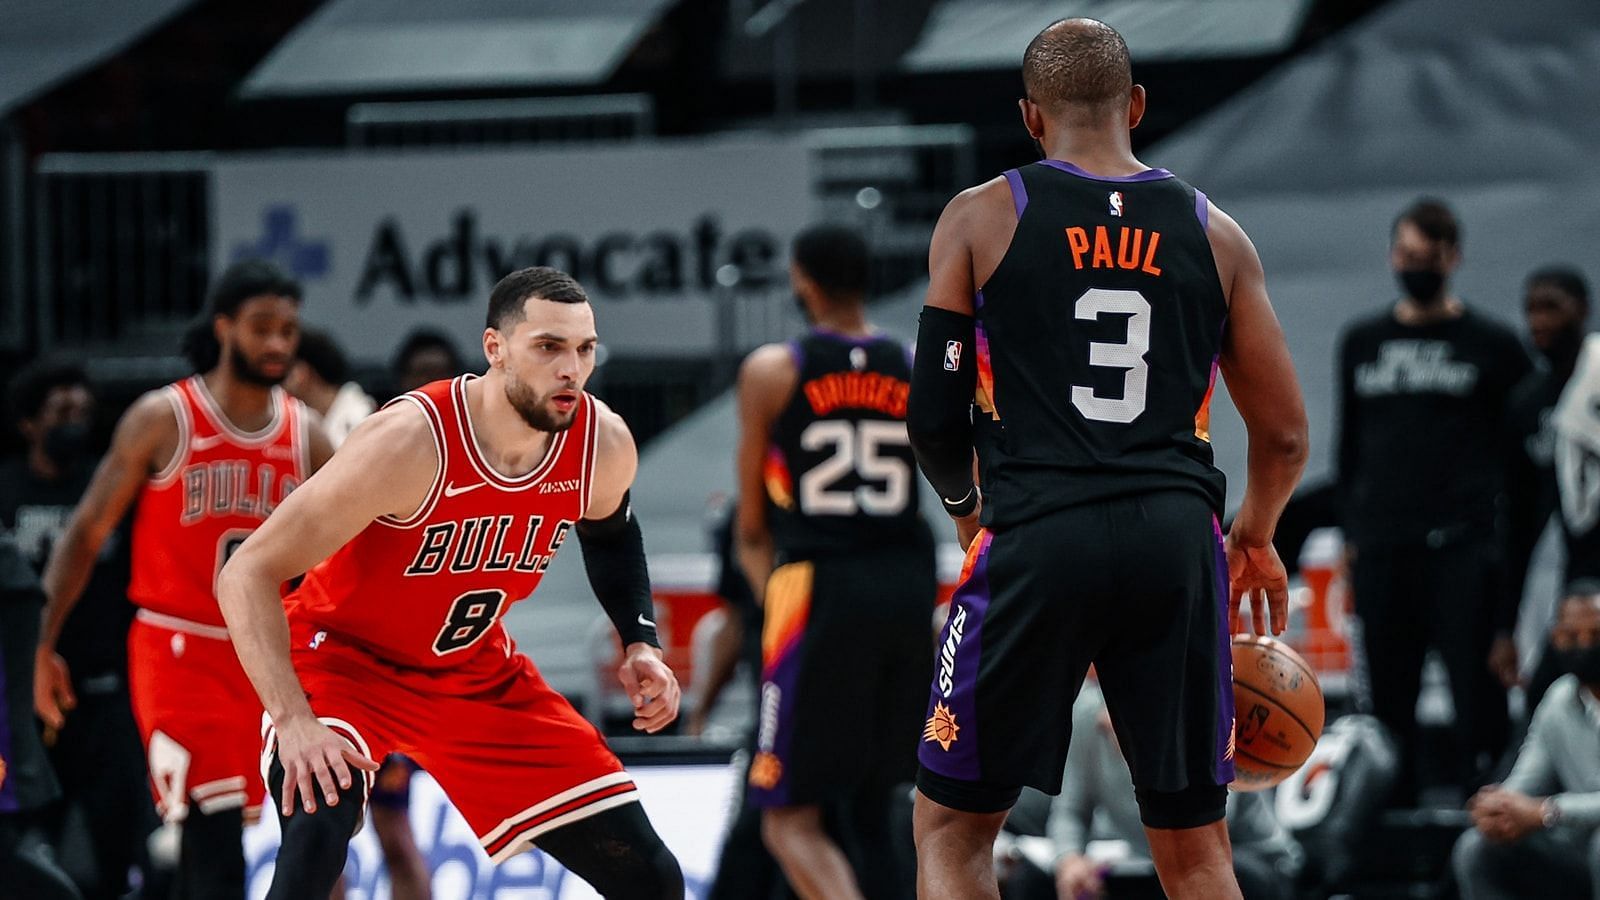 The visiting Phoenix Suns will meet the Chicago Bulls for the first time this season on Monday. [Photo: NBA.com]